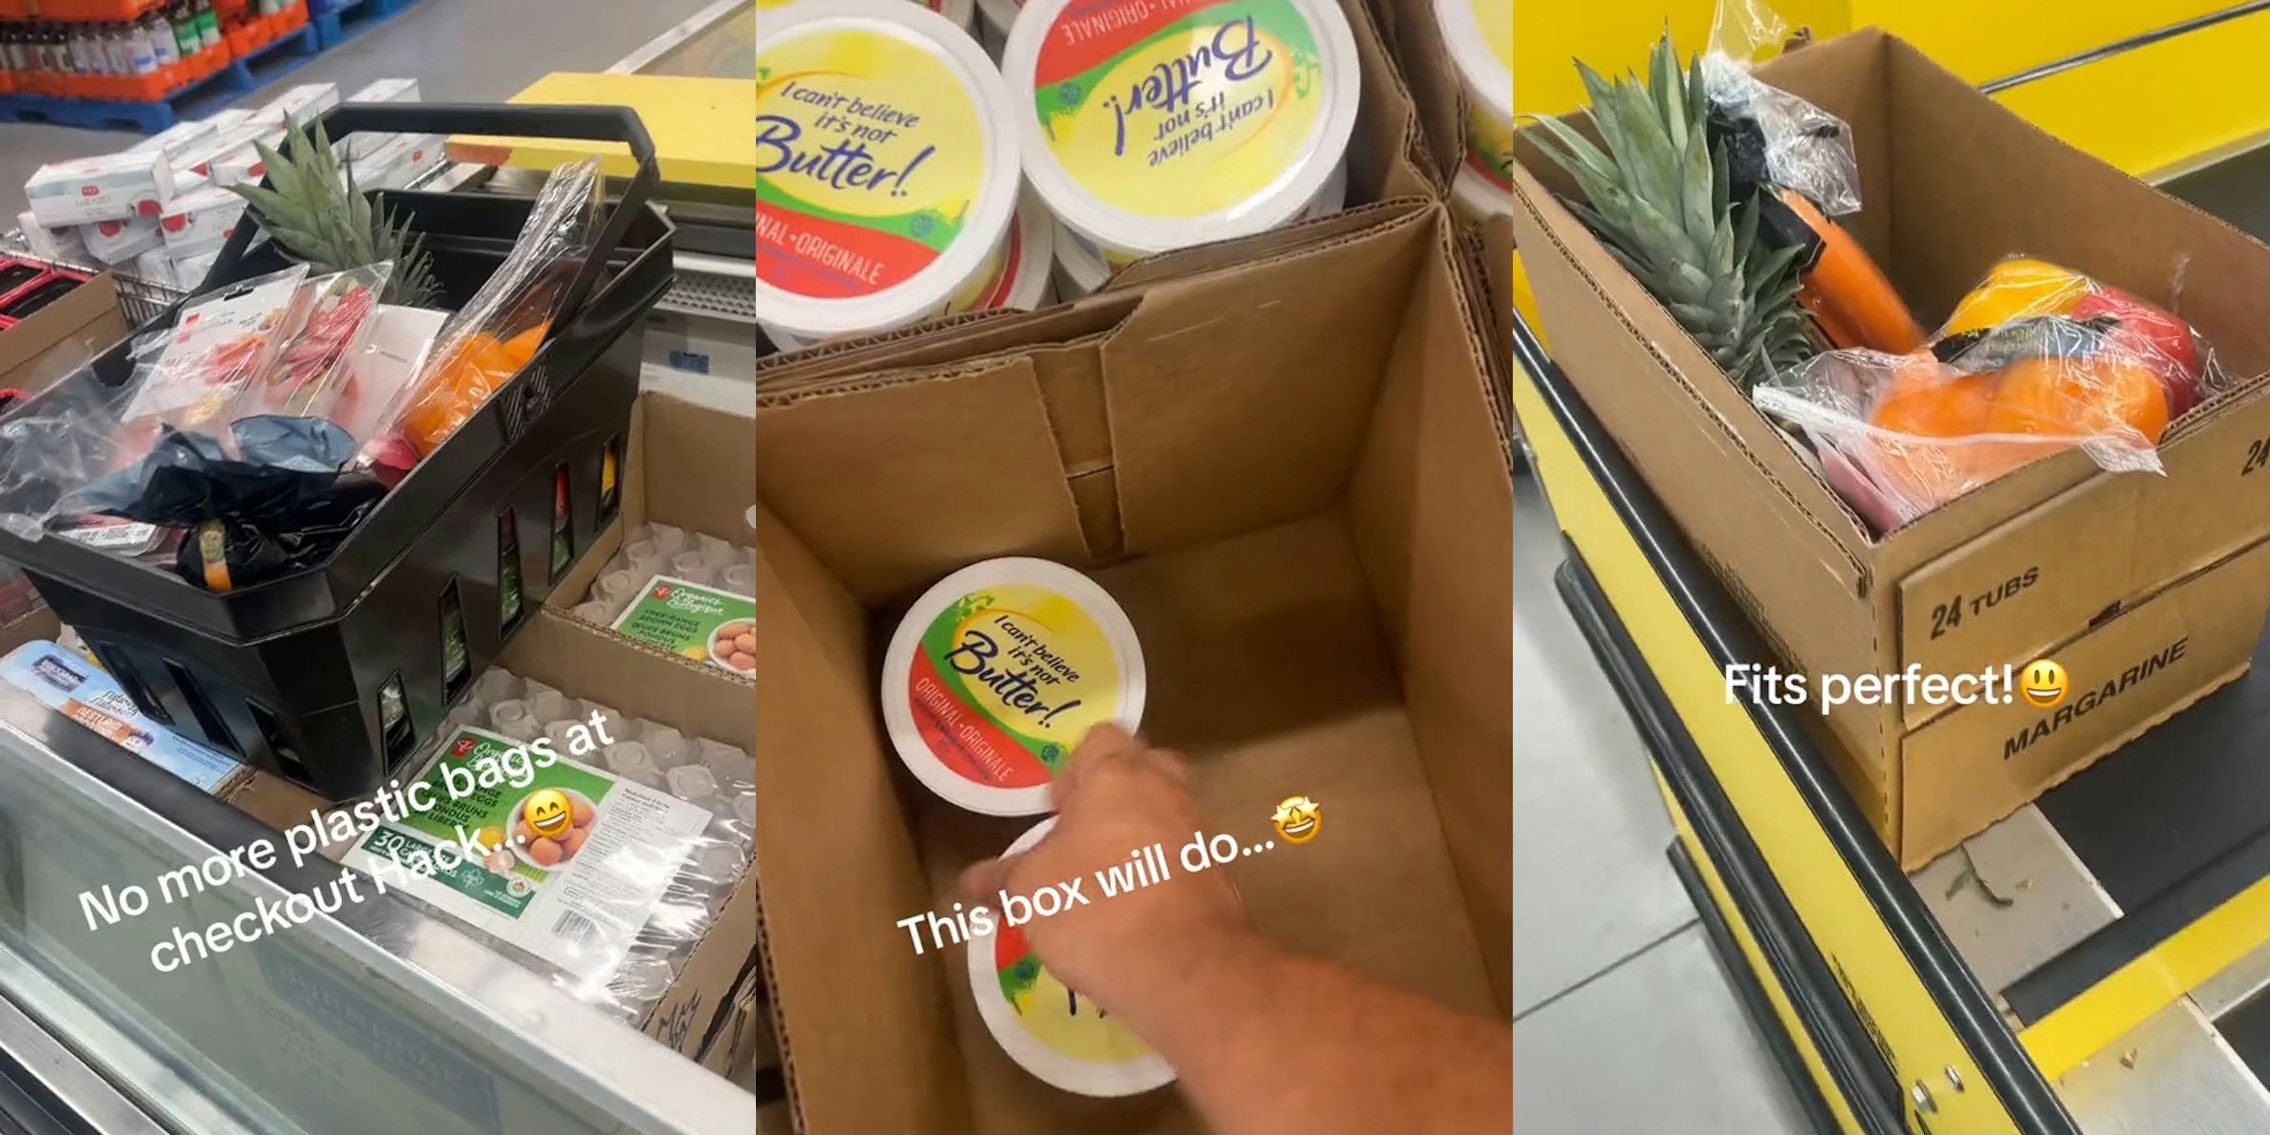 groceries in black basket with caption 'No more plastic bags at checkout hack...' (l) hand taking I Can't Believe It's Not Butter containers out of box at store with caption 'This box will do...' (c) groceries in box on conveyer belt with caption 'Fits perfect!' (r)